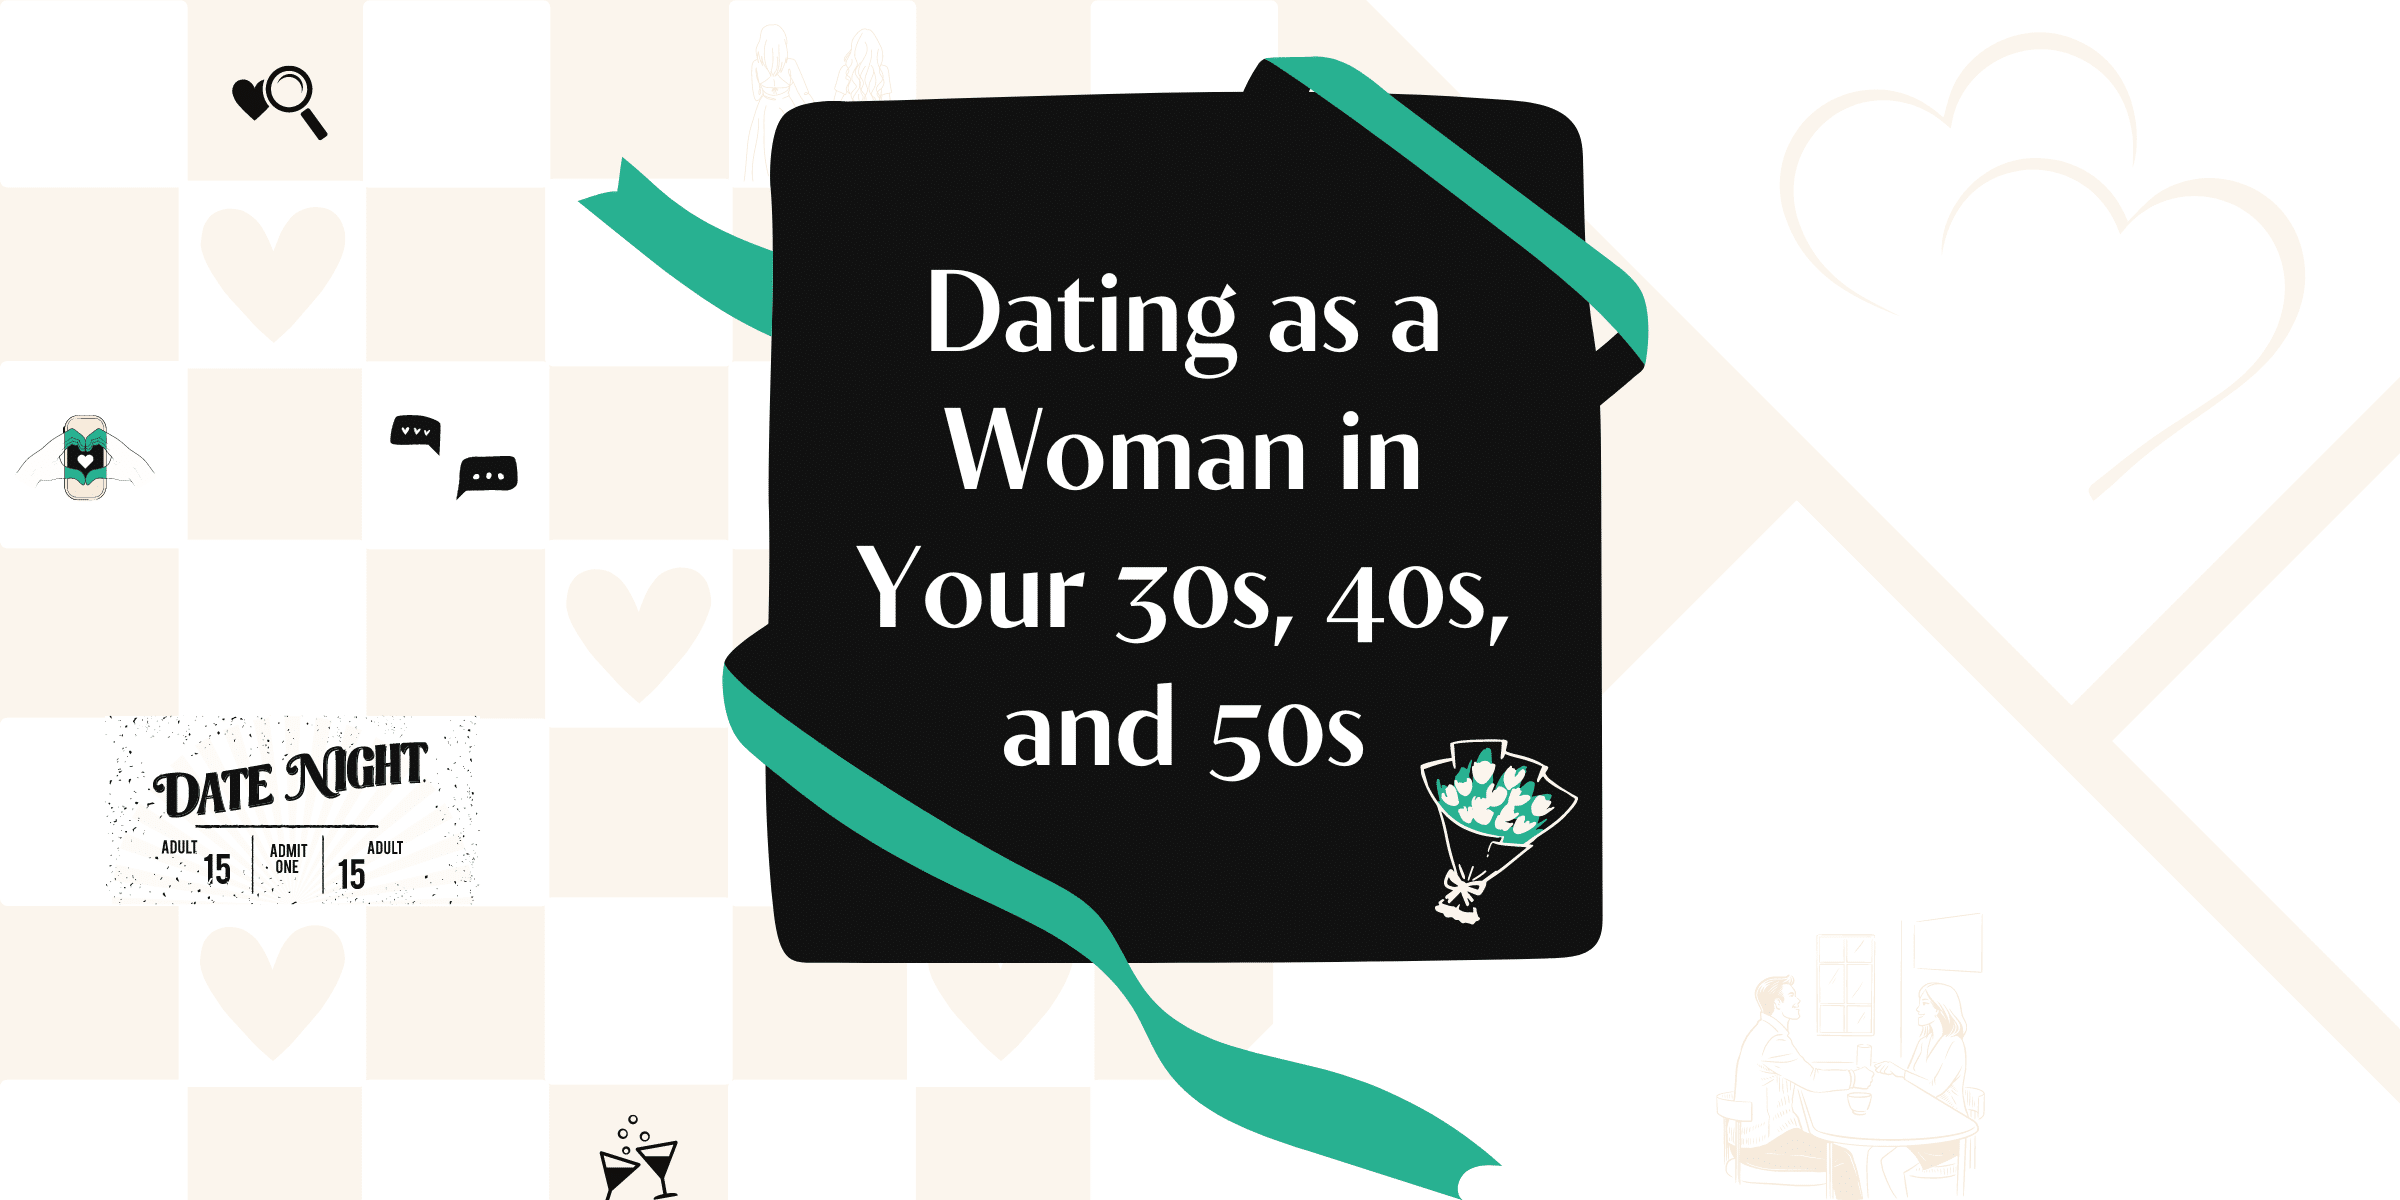 Dating as a woman in your 30s, 40s, and 50s? Tawkify's matchmaking offers personalized guidance to find love that lasts. Let's start your journey.